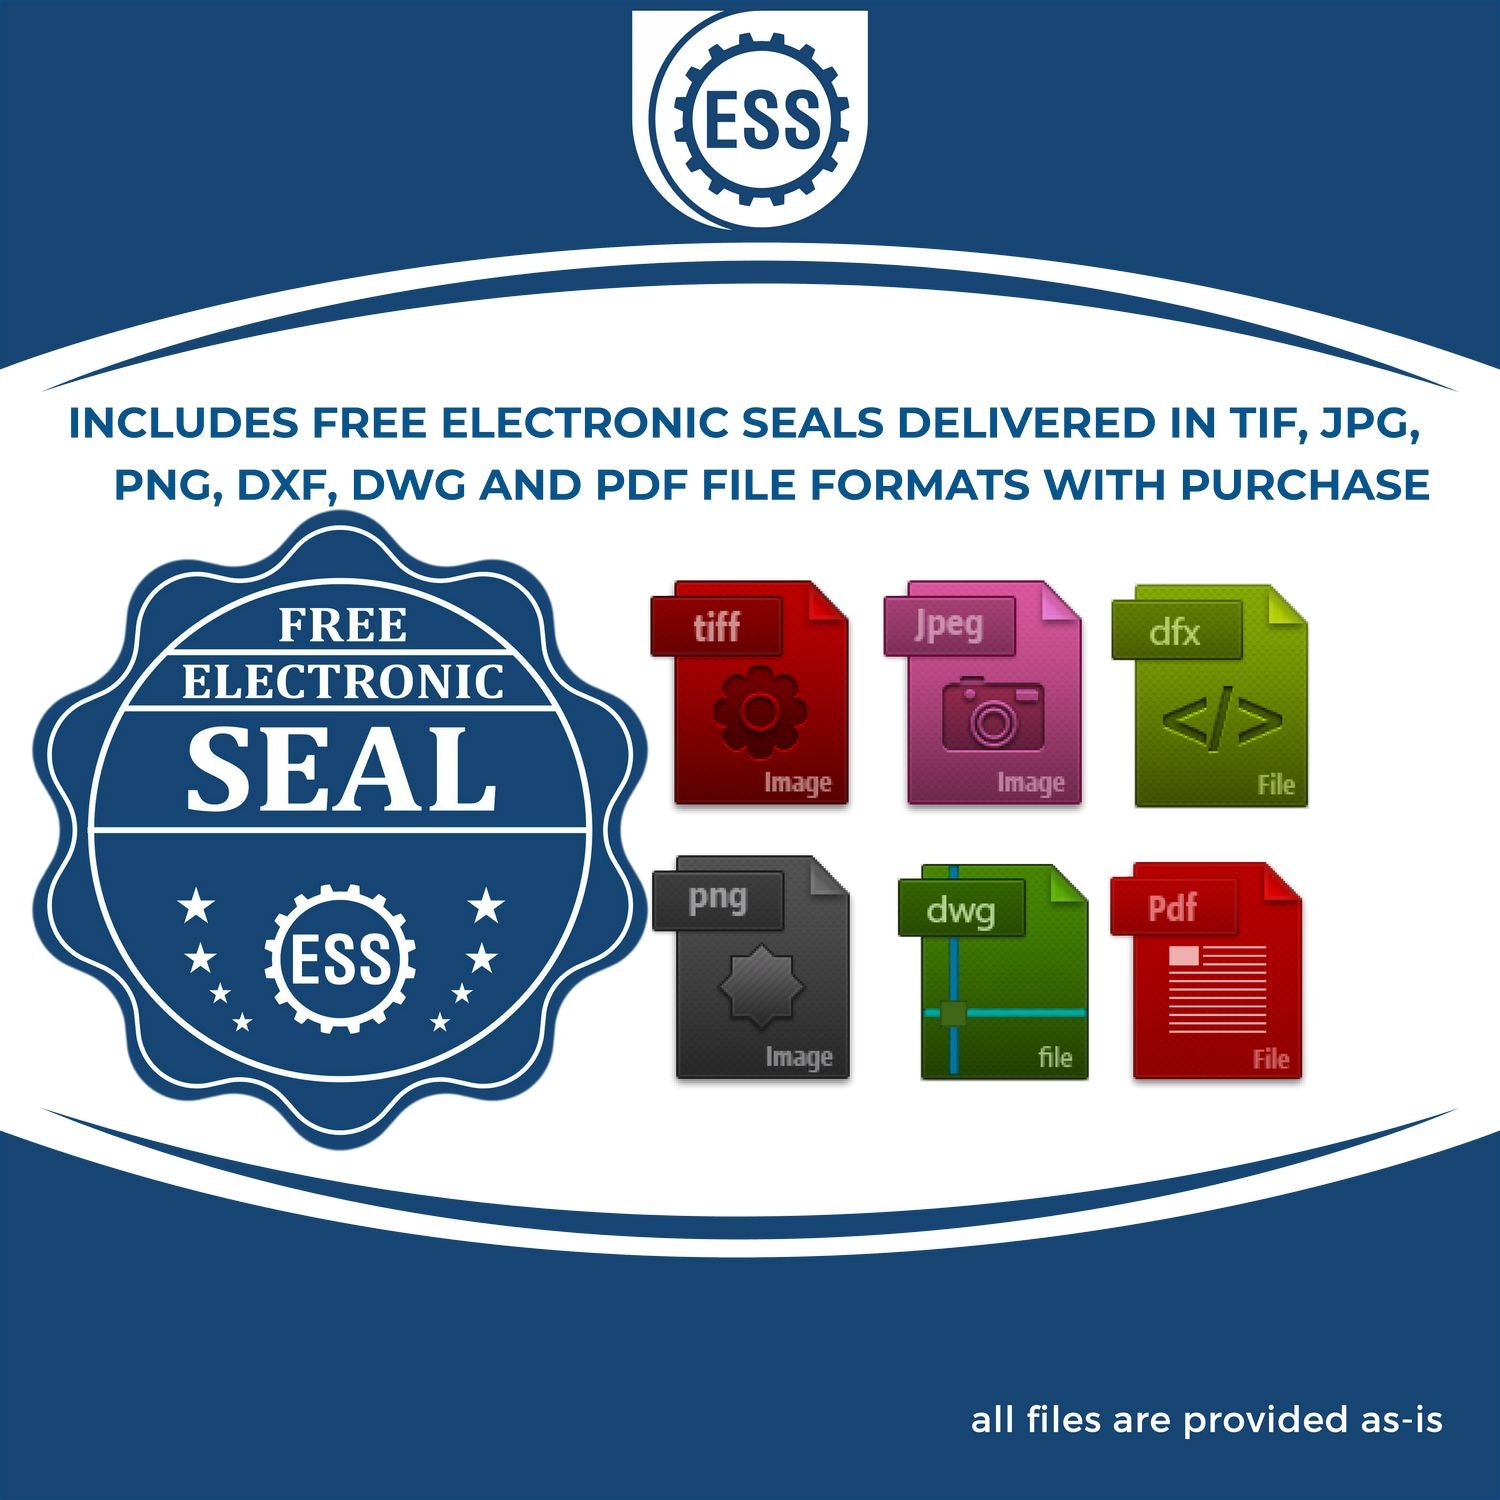 An infographic for the free electronic seal for the Long Reach New Mexico Land Surveyor Seal illustrating the different file type icons such as DXF, DWG, TIF, JPG and PNG.